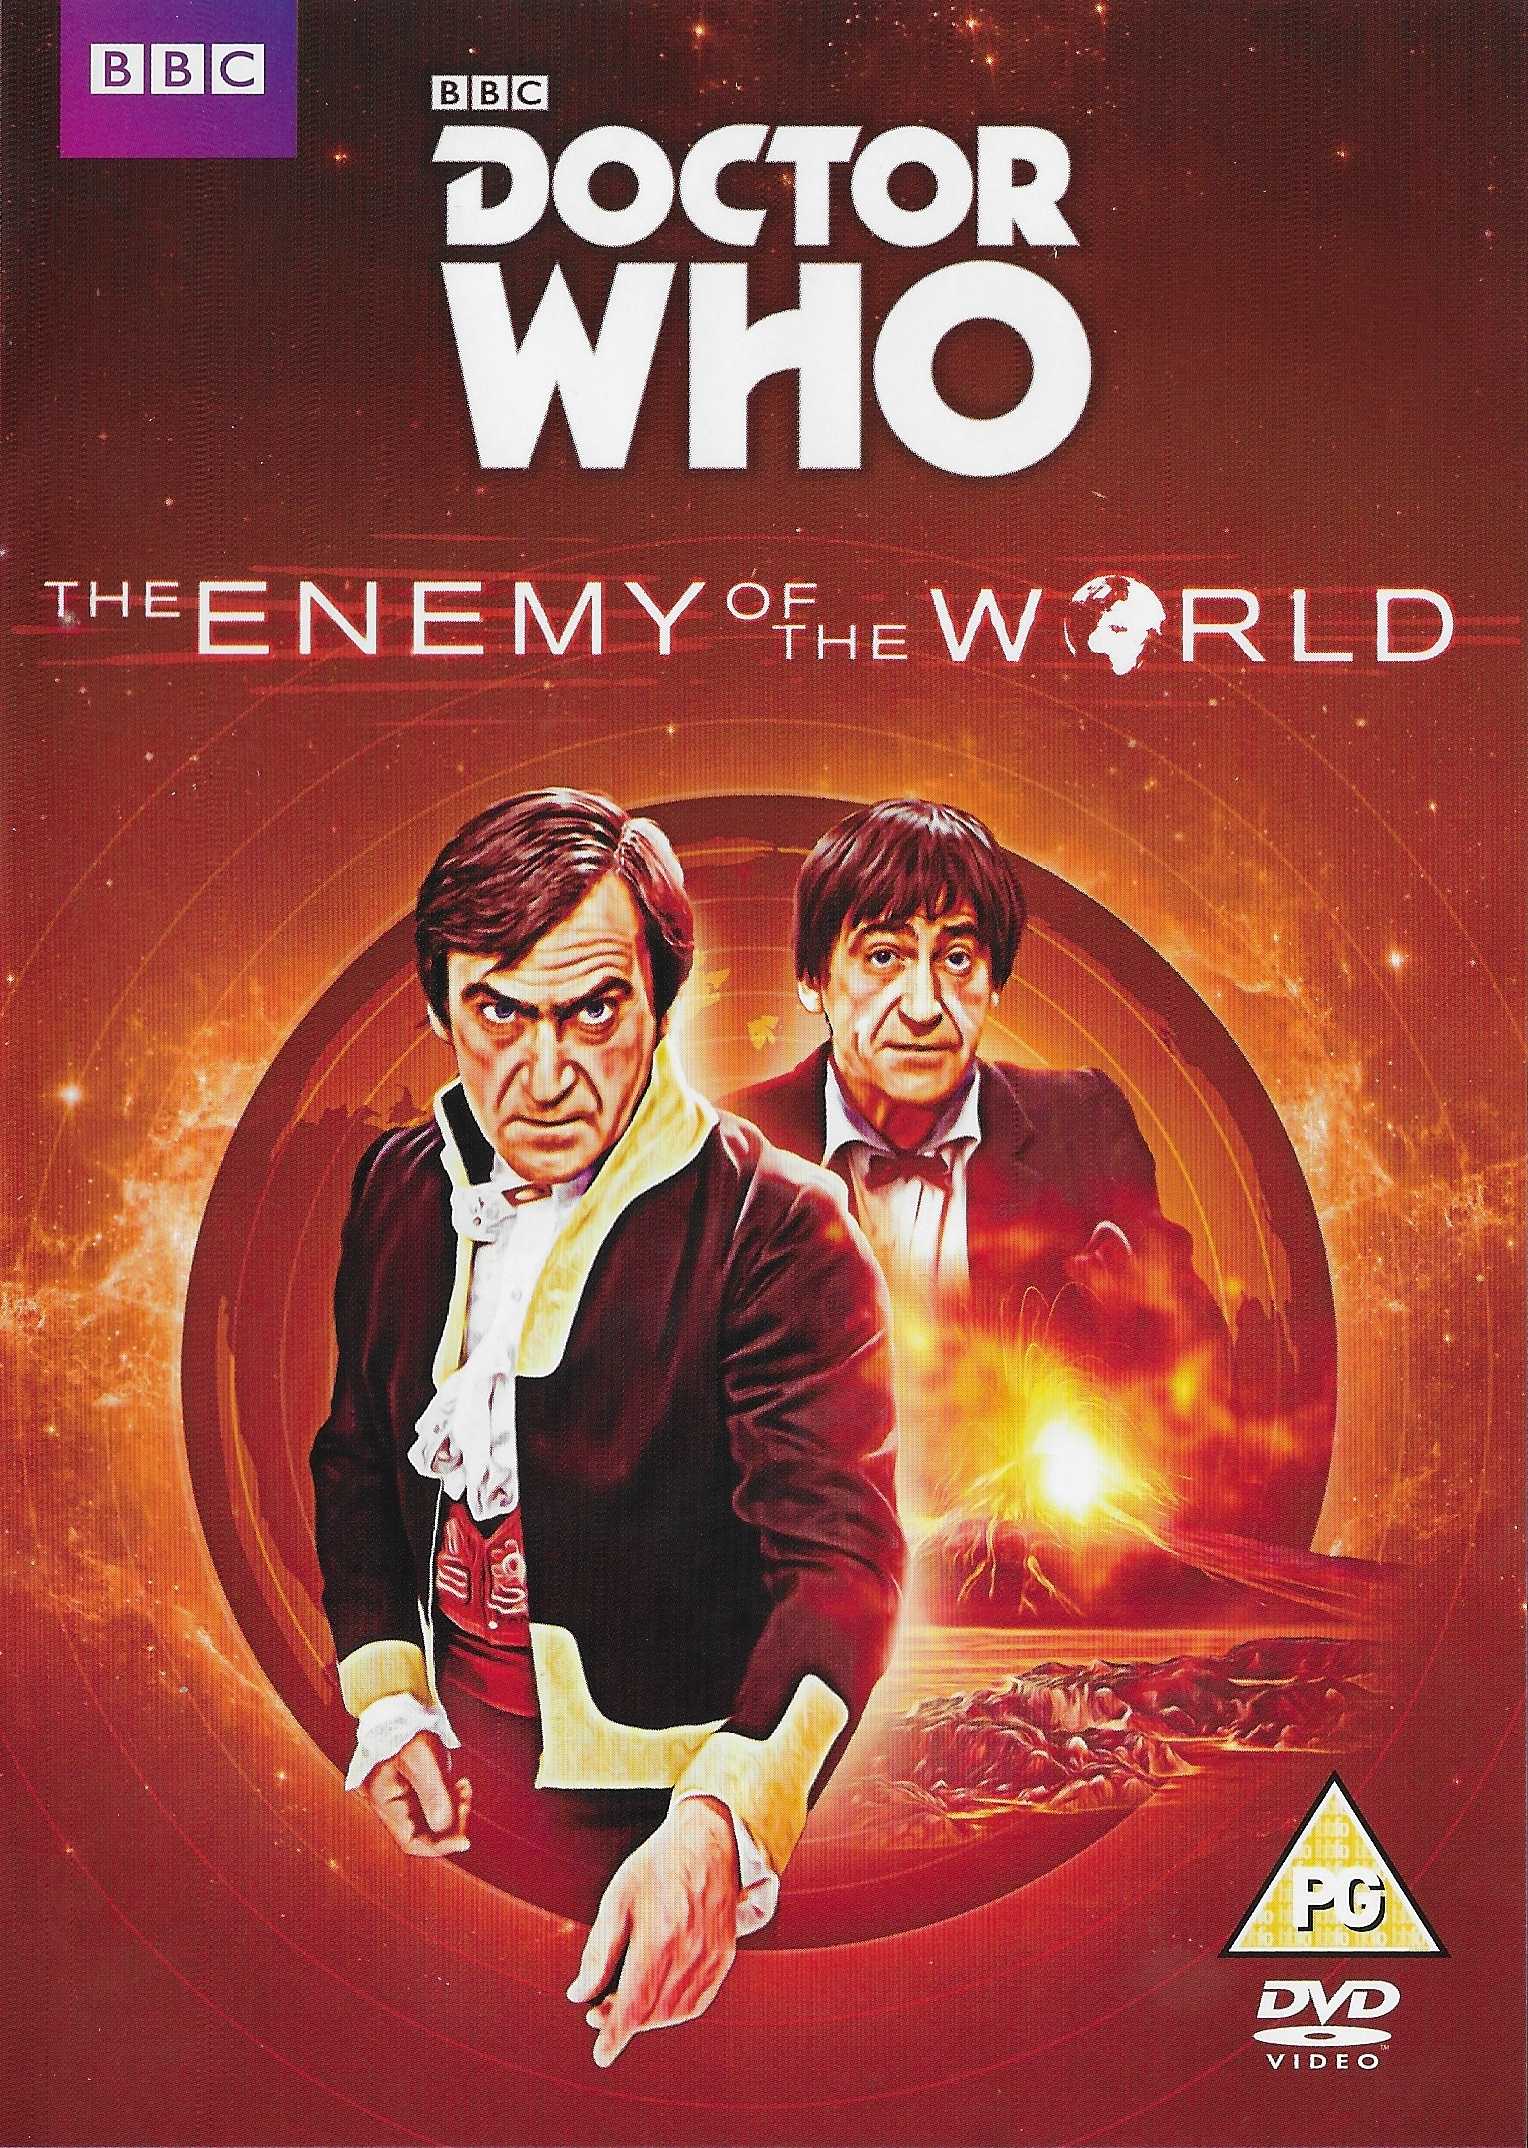 Picture of BBCDVD 3866 Doctor Who - The enemy of the world by artist David Whitaker from the BBC dvds - Records and Tapes library